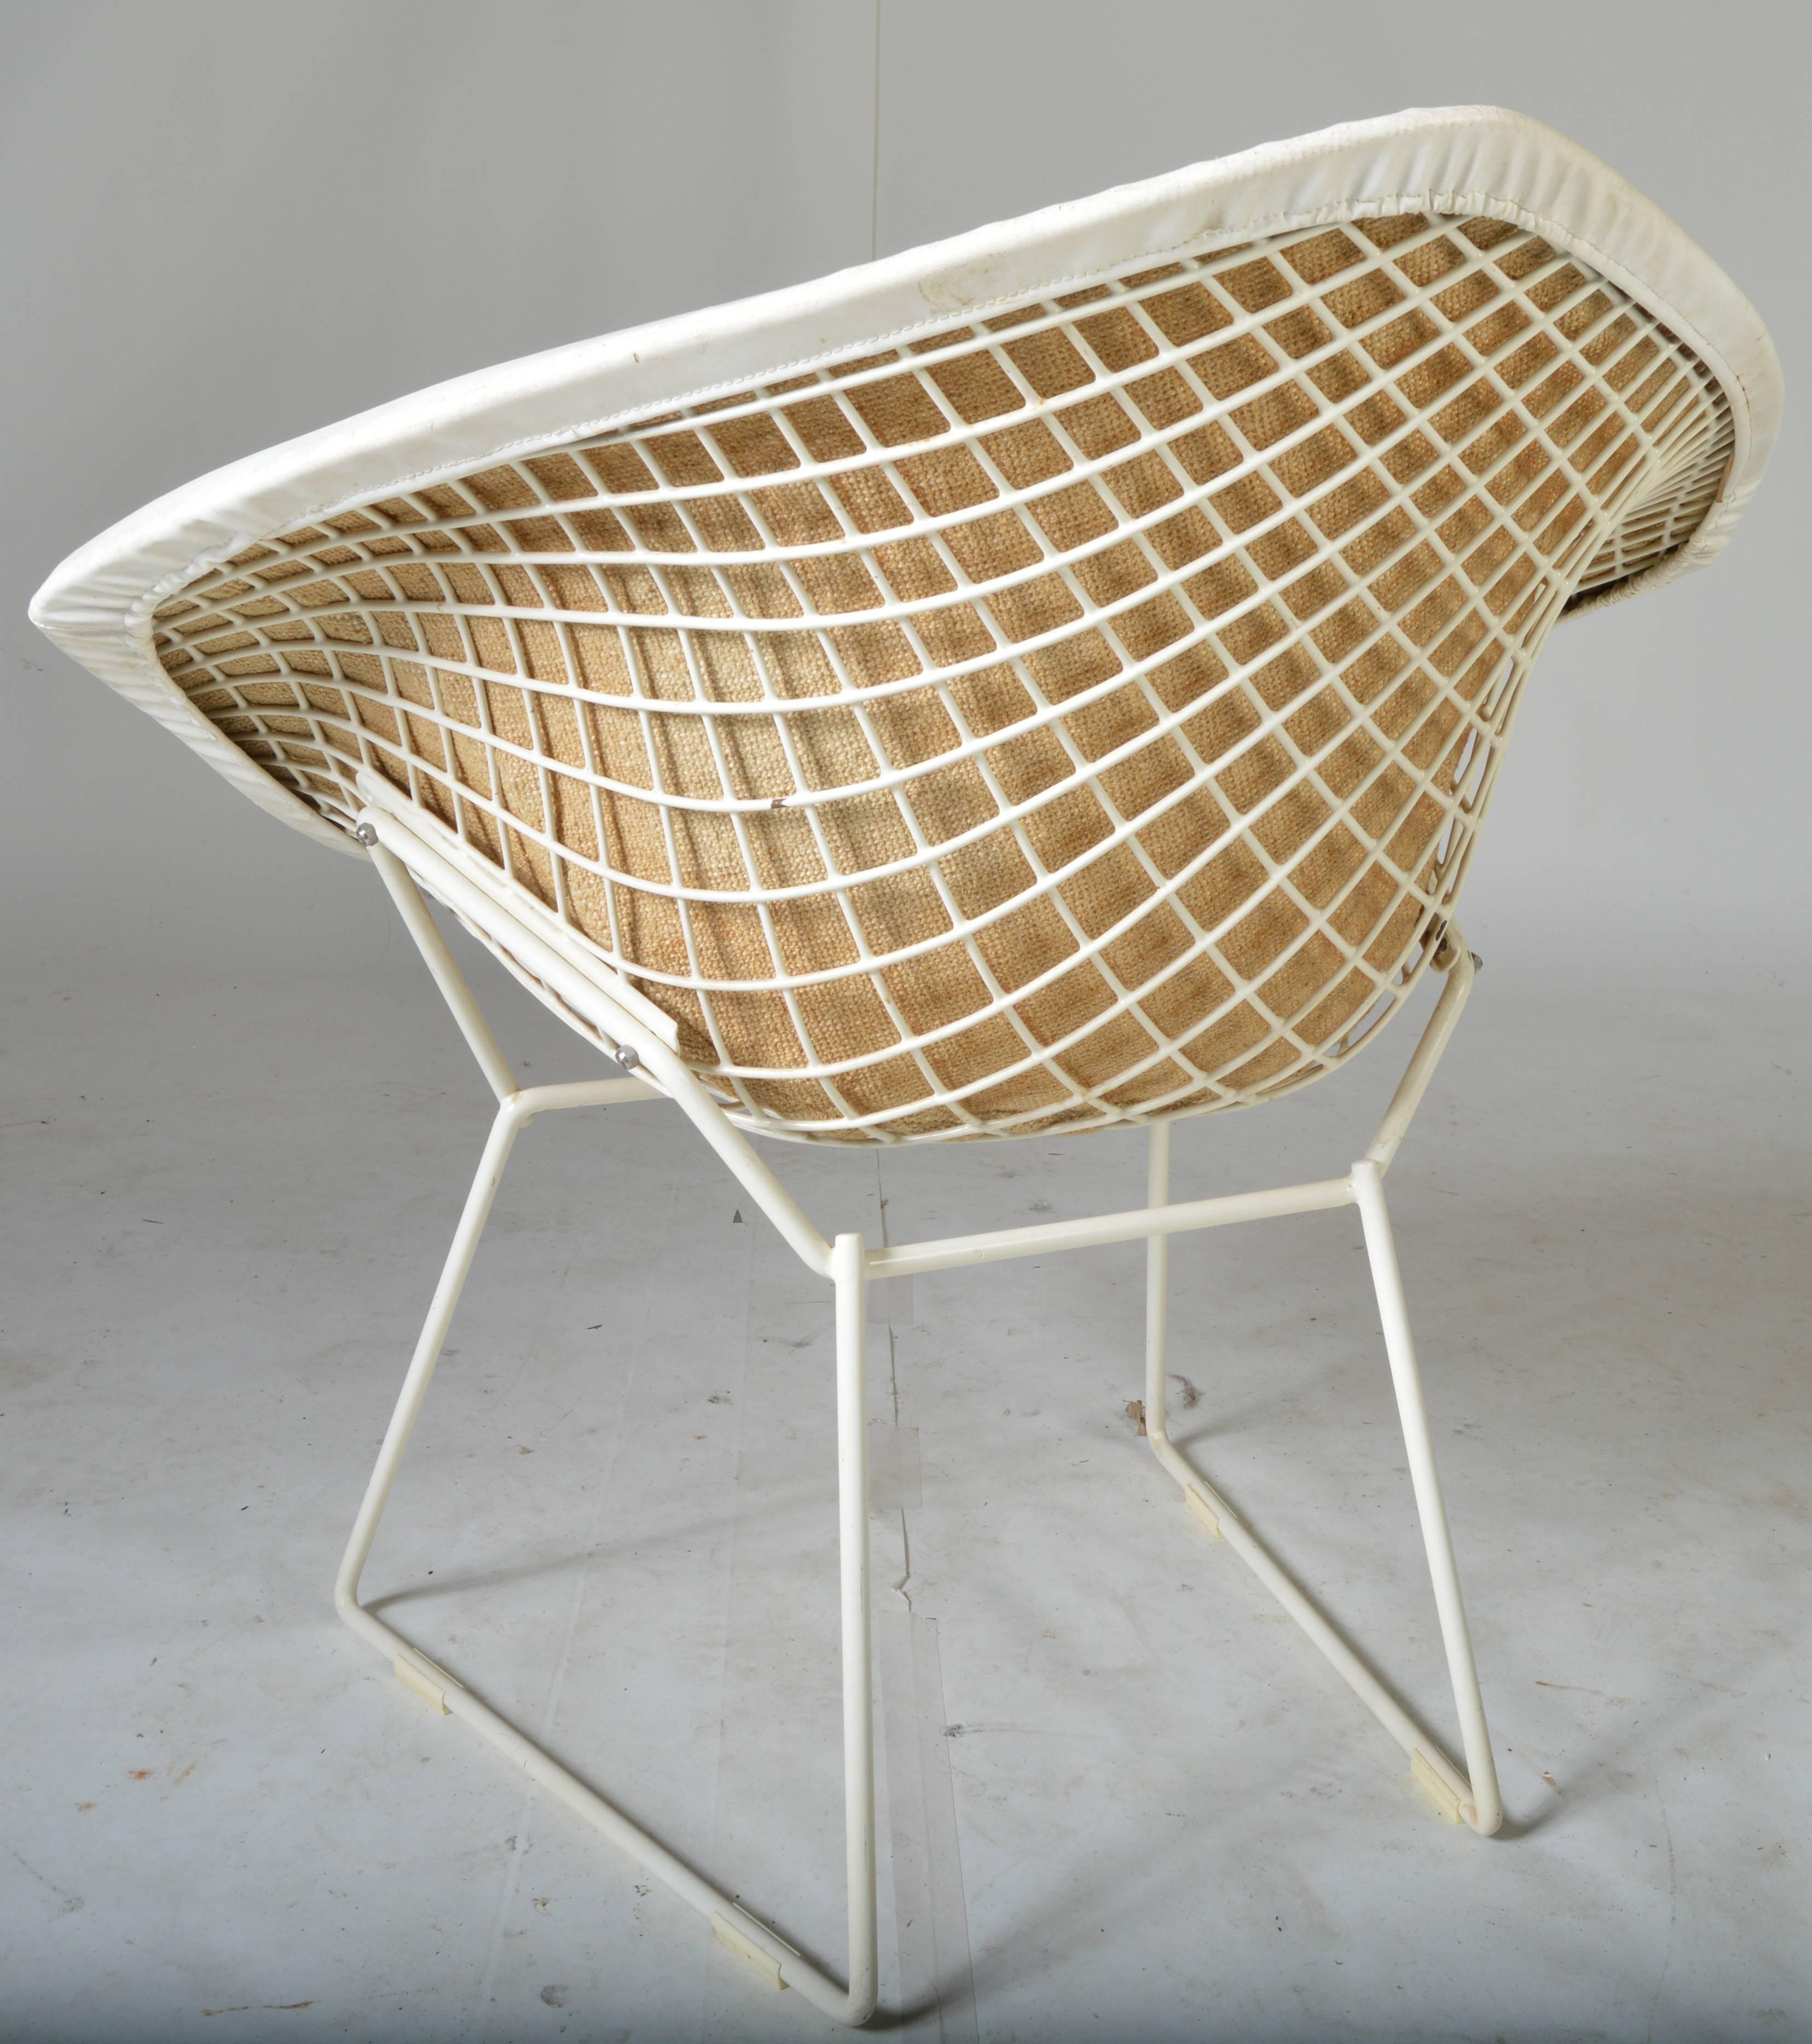 A stunning example of Harry Bertoia's Classic diamond chair in white having it's original white leather cover. Breathtaking!